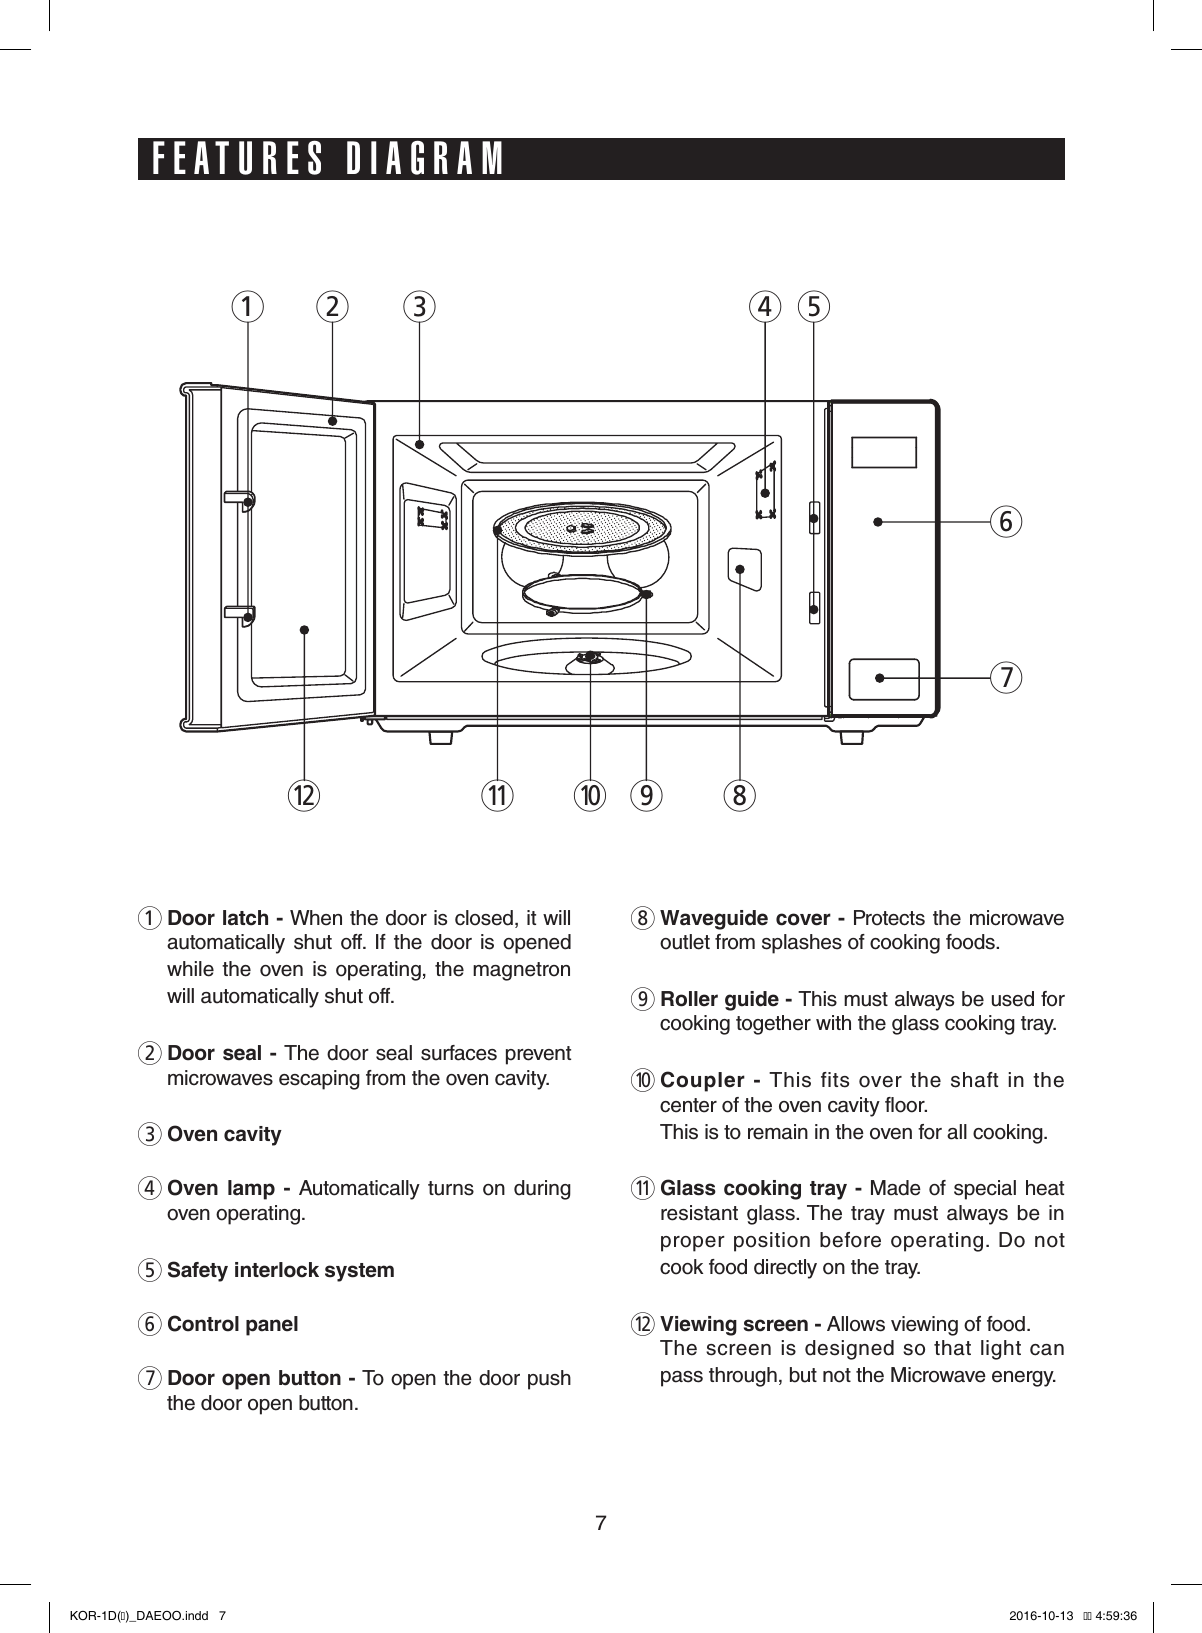 71 Door latch - When the door is closed, it will  automatically  shut  off.  If  the  door  is  opened while  the  oven  is  operating, the magnetron will automatically shut off.2 Door seal - The door seal surfaces prevent microwaves escaping from the oven cavity.3 Oven cavity4 Oven lamp - Automatically turns  on  during oven operating.5 Safety interlock system 6 Control panel7 Door open button - To open the door push the door open button.8 Waveguide cover - Protects the microwave outlet from splashes of cooking foods.9 Roller guide - This must always be used for cooking together with the glass cooking tray.0 Coupler  -  This  fits  over  the  shaft  in  the center of the oven cavity floor.  This is to remain in the oven for all cooking.q Glass cooking tray - Made of special heat resistant  glass. The tray  must  always  be  in proper  position  before  operating.  Do  not cook food directly on the tray.w Viewing screen - Allows viewing of food.  The  screen  is  designed  so  that  light  can pass through, but not the Microwave energy.12 43567890qwFEATURES DIAGRAMKOR-1D(�)_DAEOO.indd   7 2016-10-13   �� 4:59:36